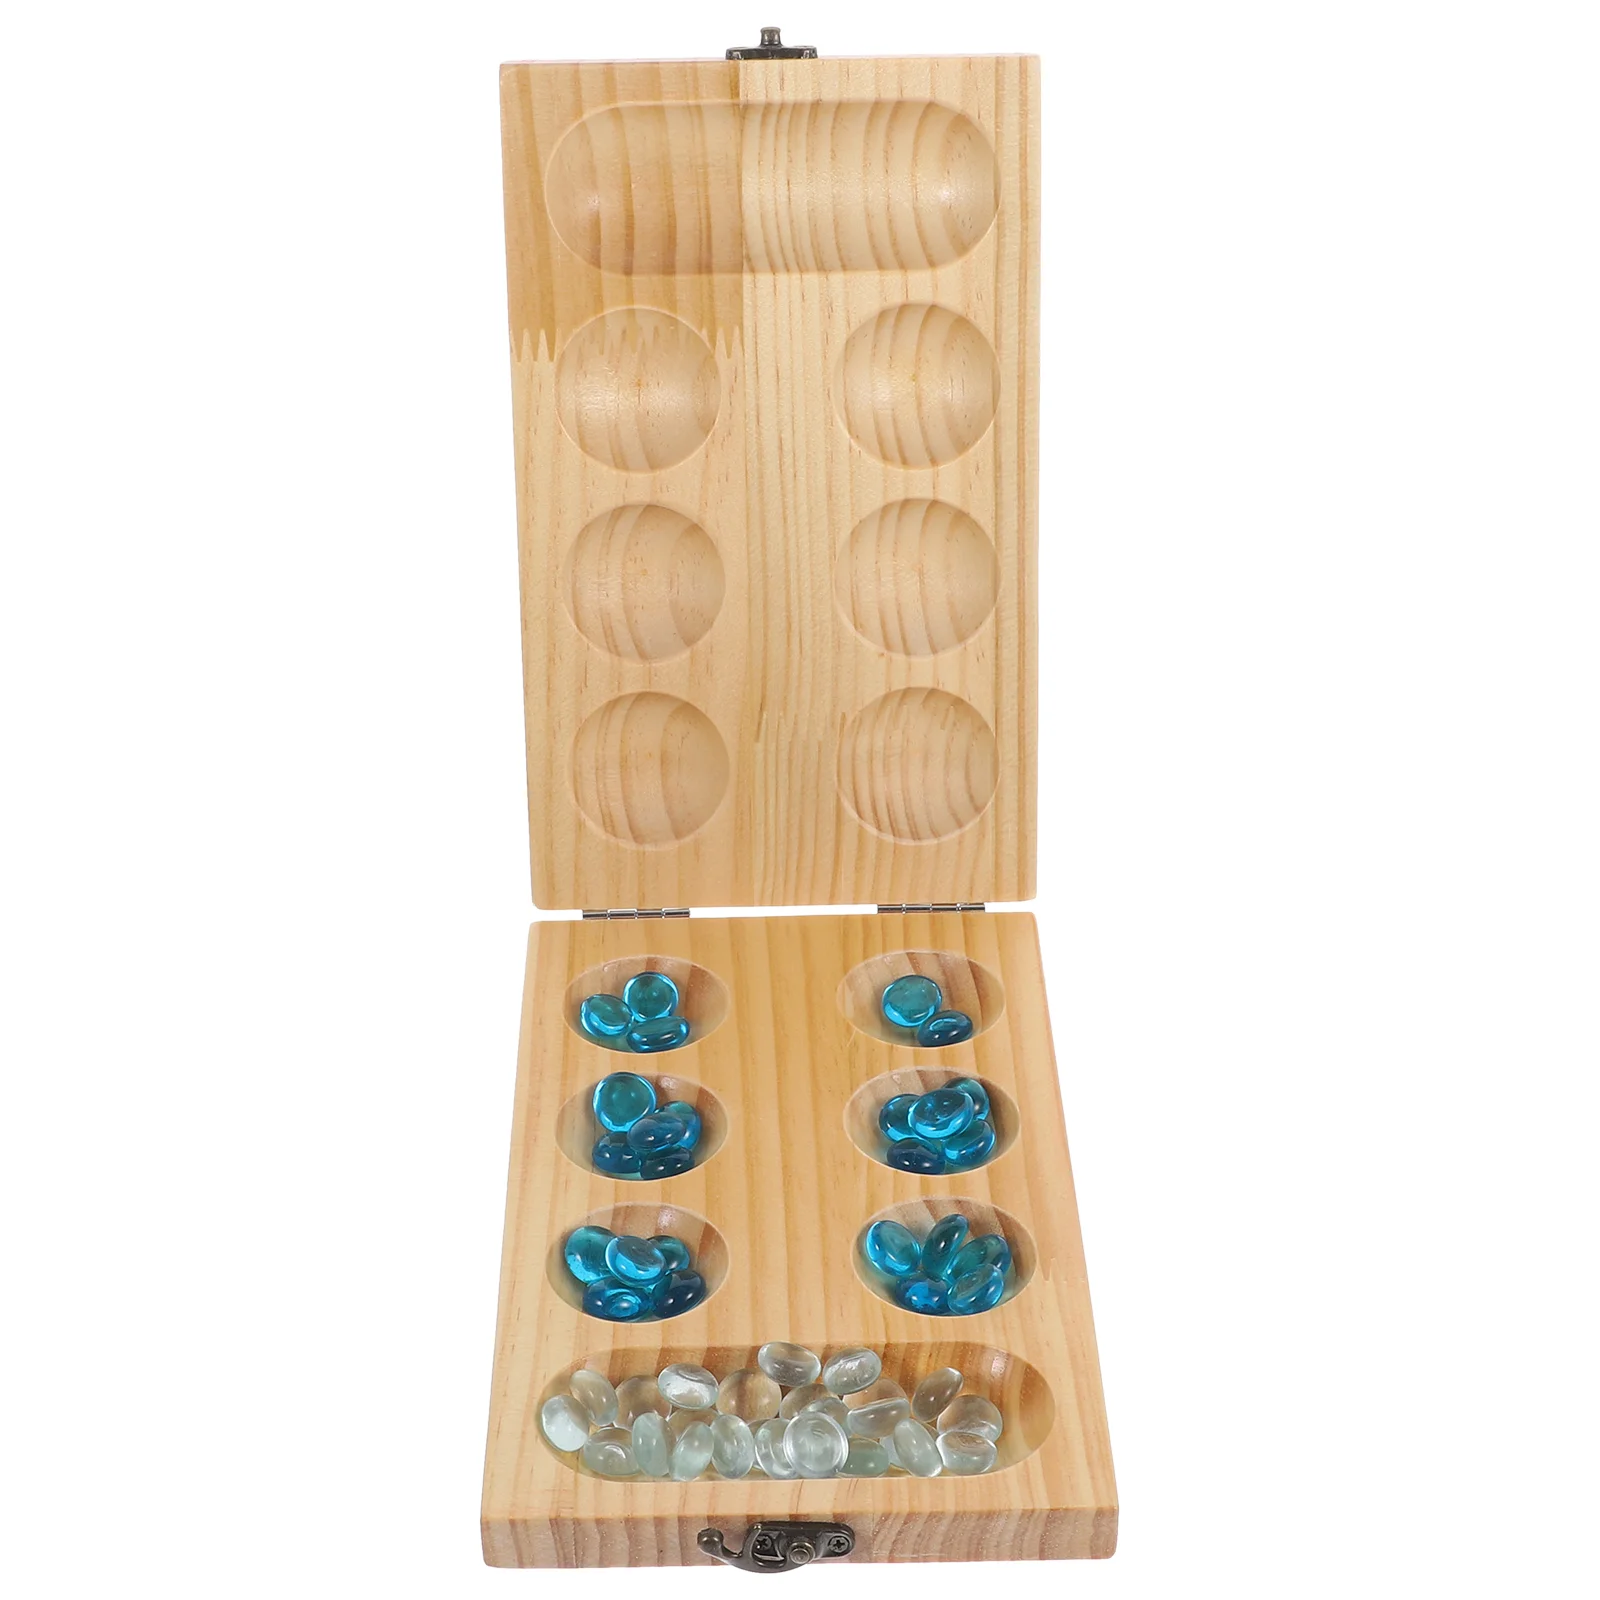 Mancala Game For Kid Set Family Beads Ages 3+ Wooden For Party Gift Whole Family Boys Girls toys school bus for kids ages 4 8 toddlers 1 3 car boys birthday gift campus